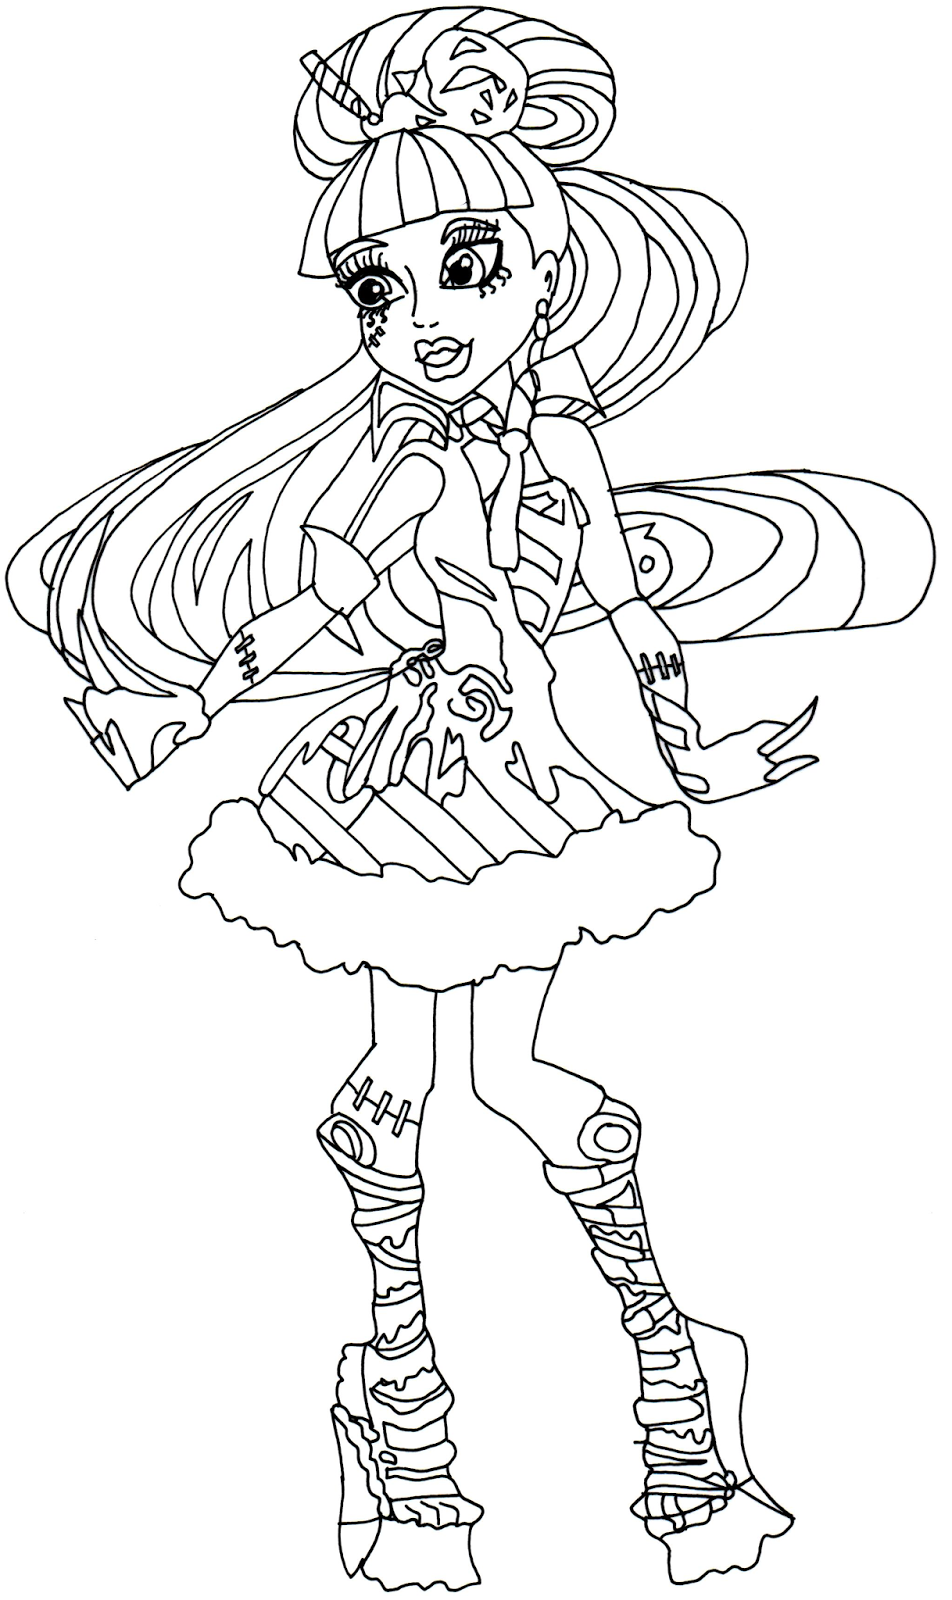 Sweet 1600 coloring pages download and print for free